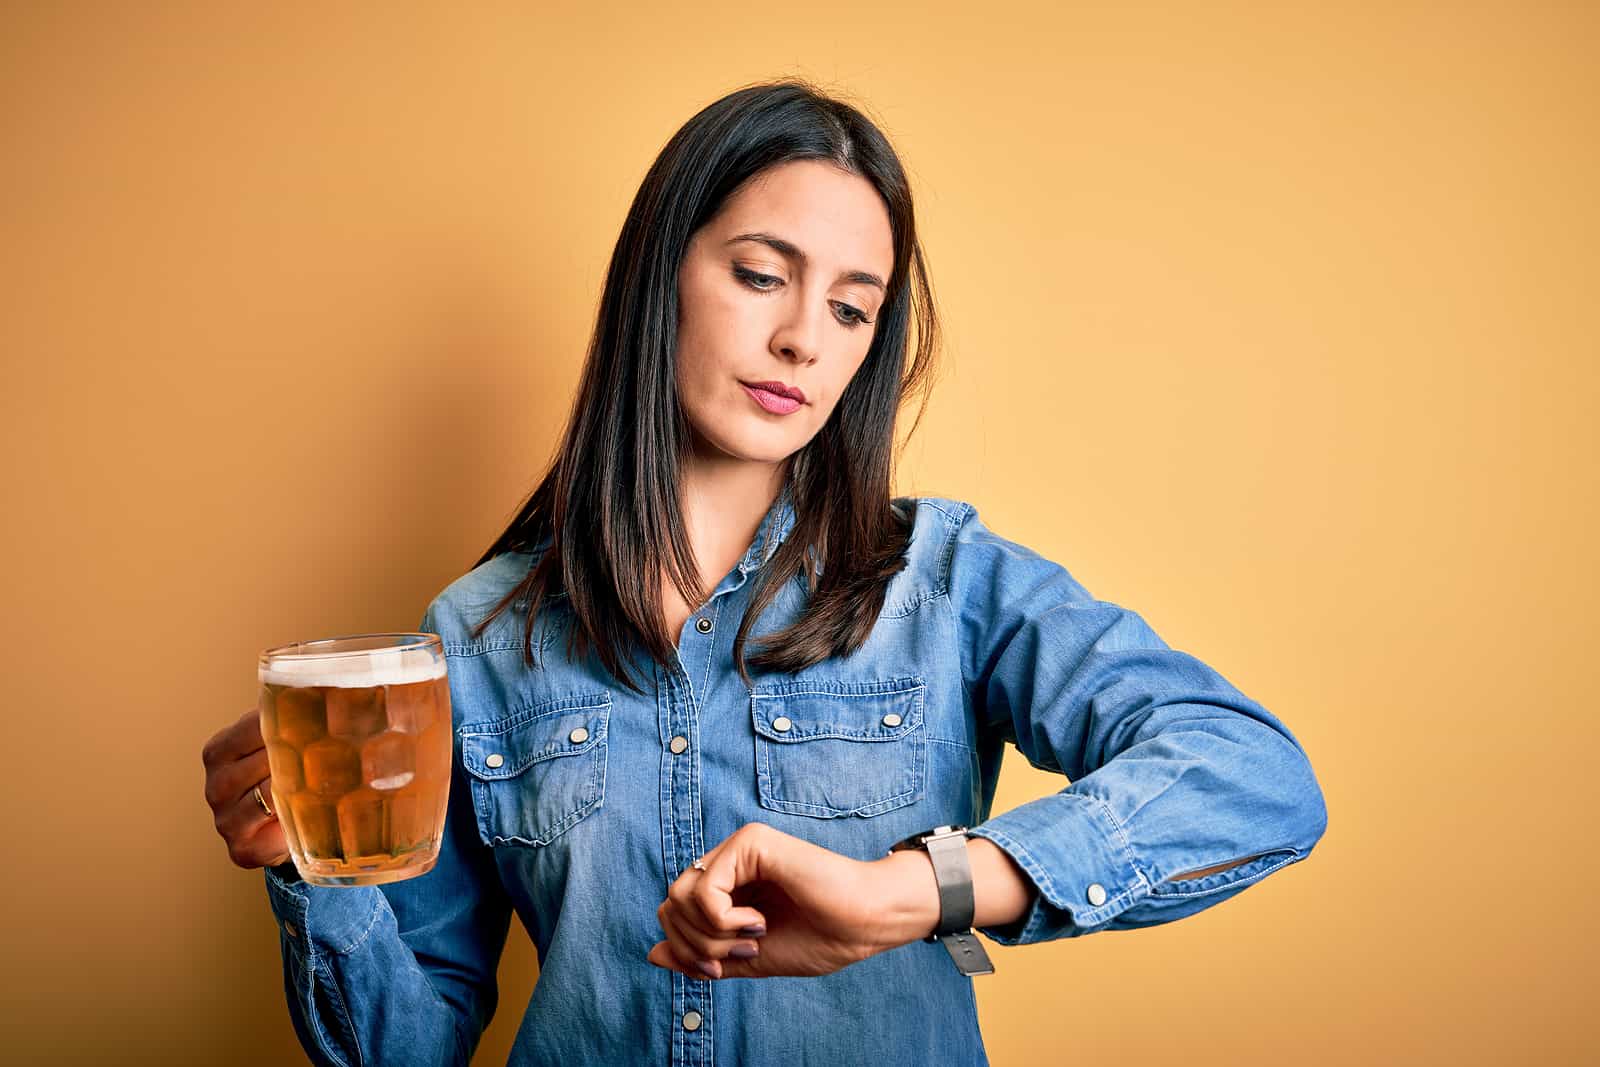 woman drinking and looking at watch to calculate how long after drinking can you drive in Utah